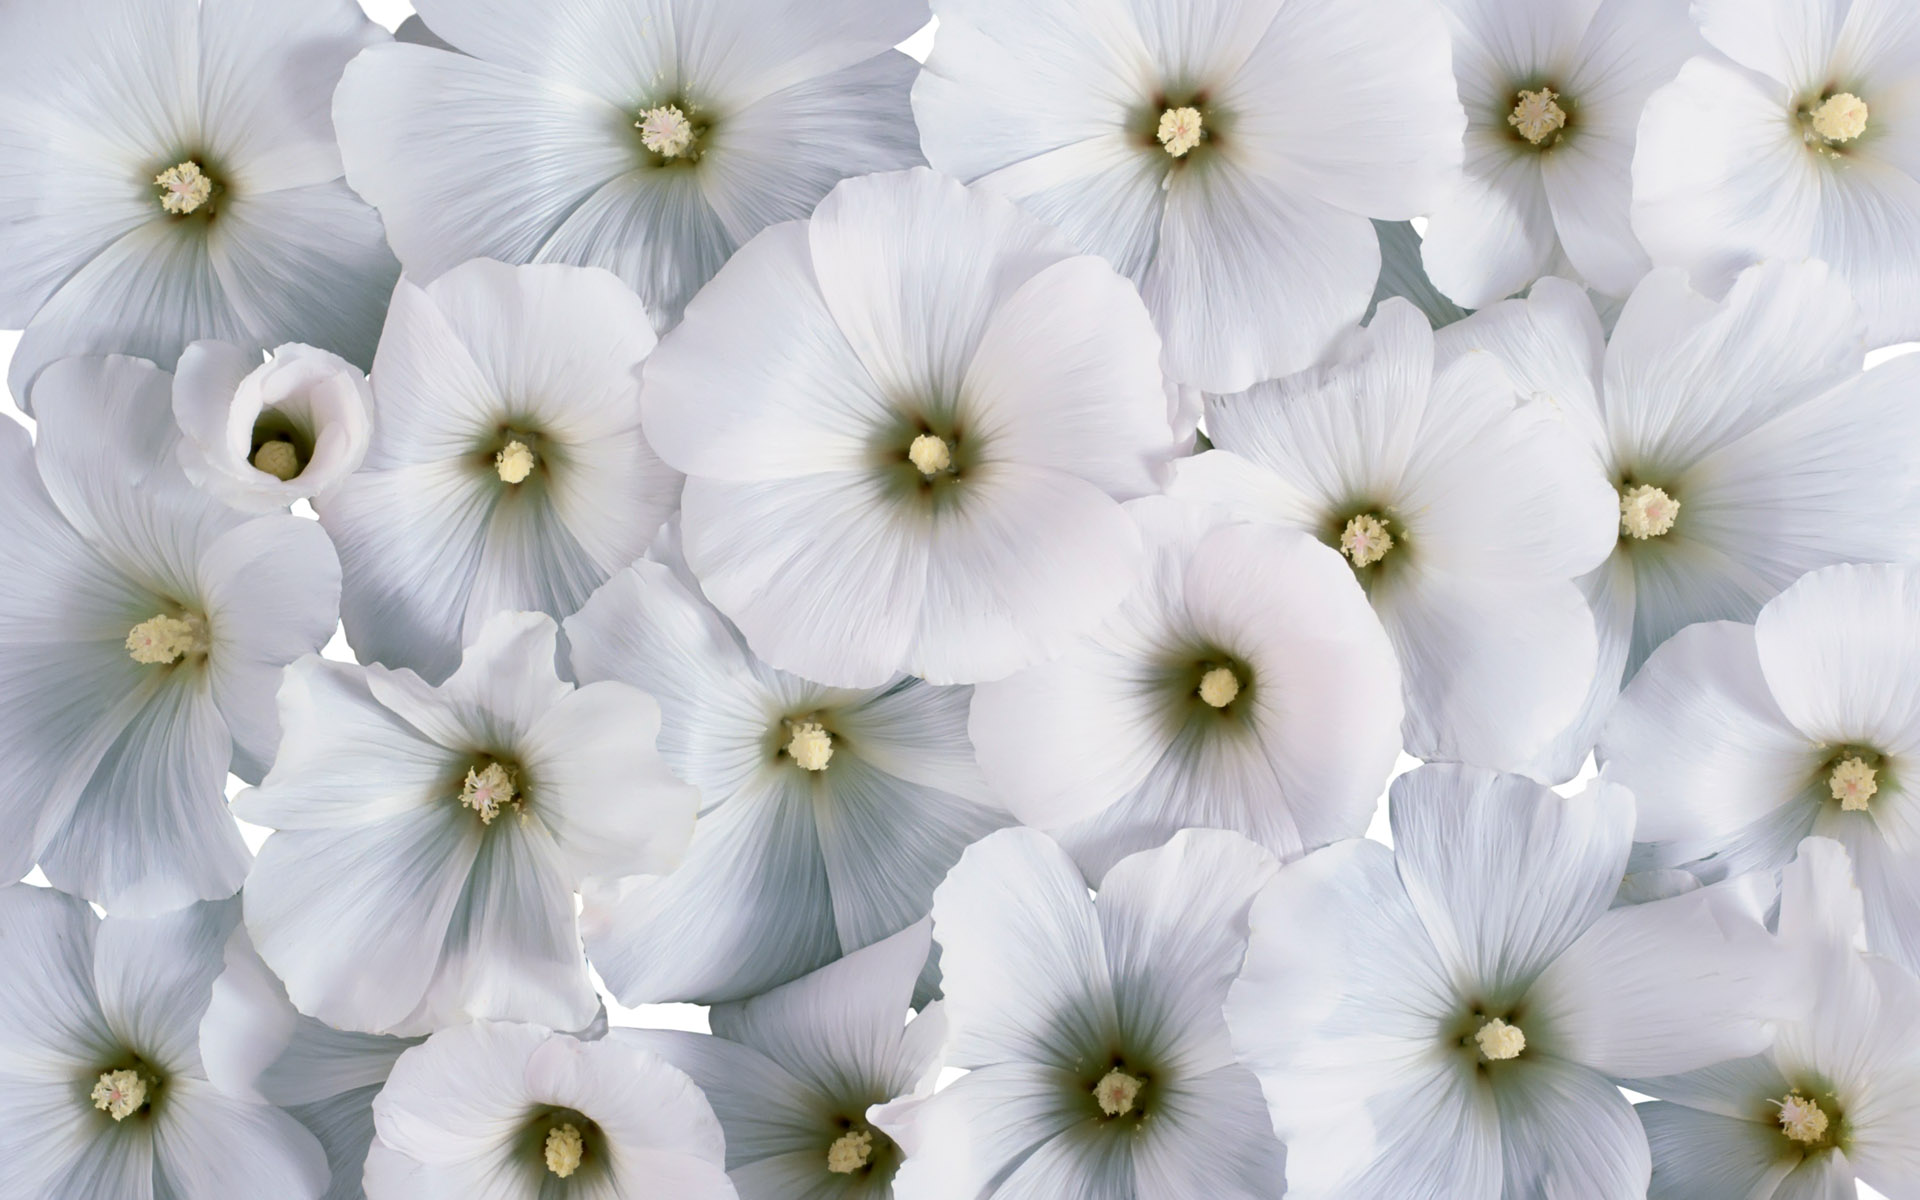 Cool White Flowers 23947 1920x1200 px